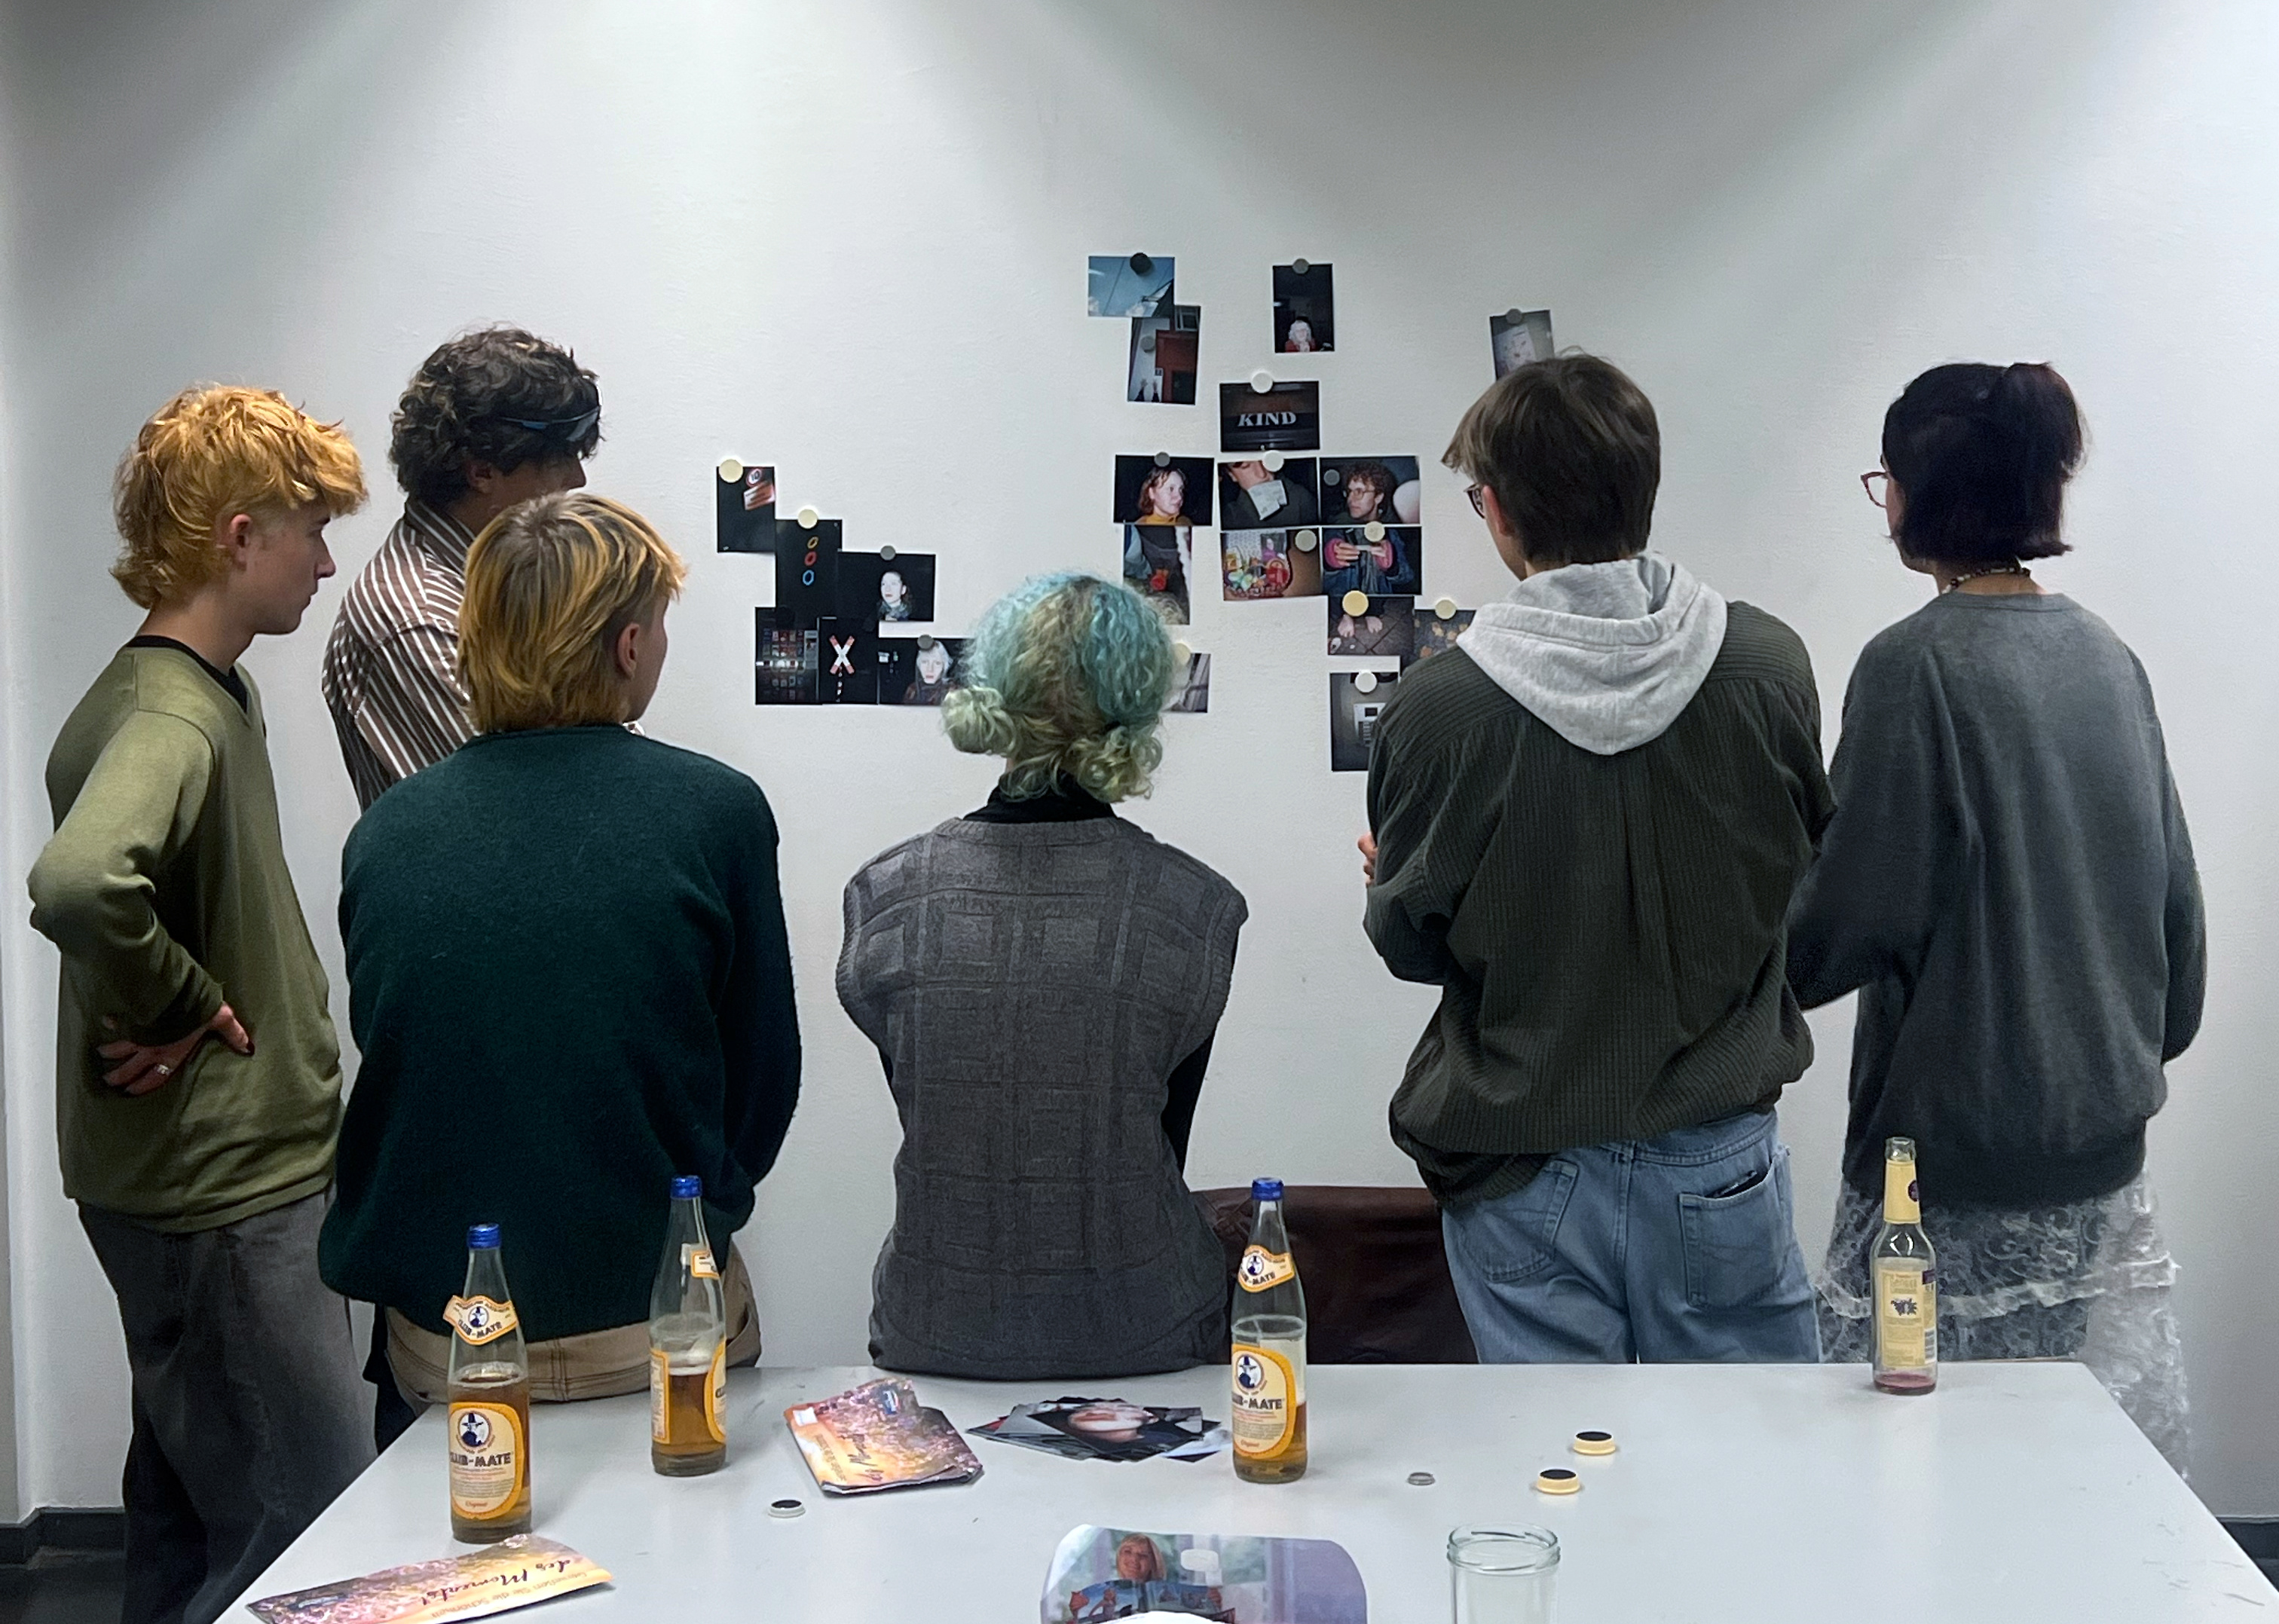 Five young art scholarship holders can be seen from behind, standing in front of a white wall with photos hanging on it